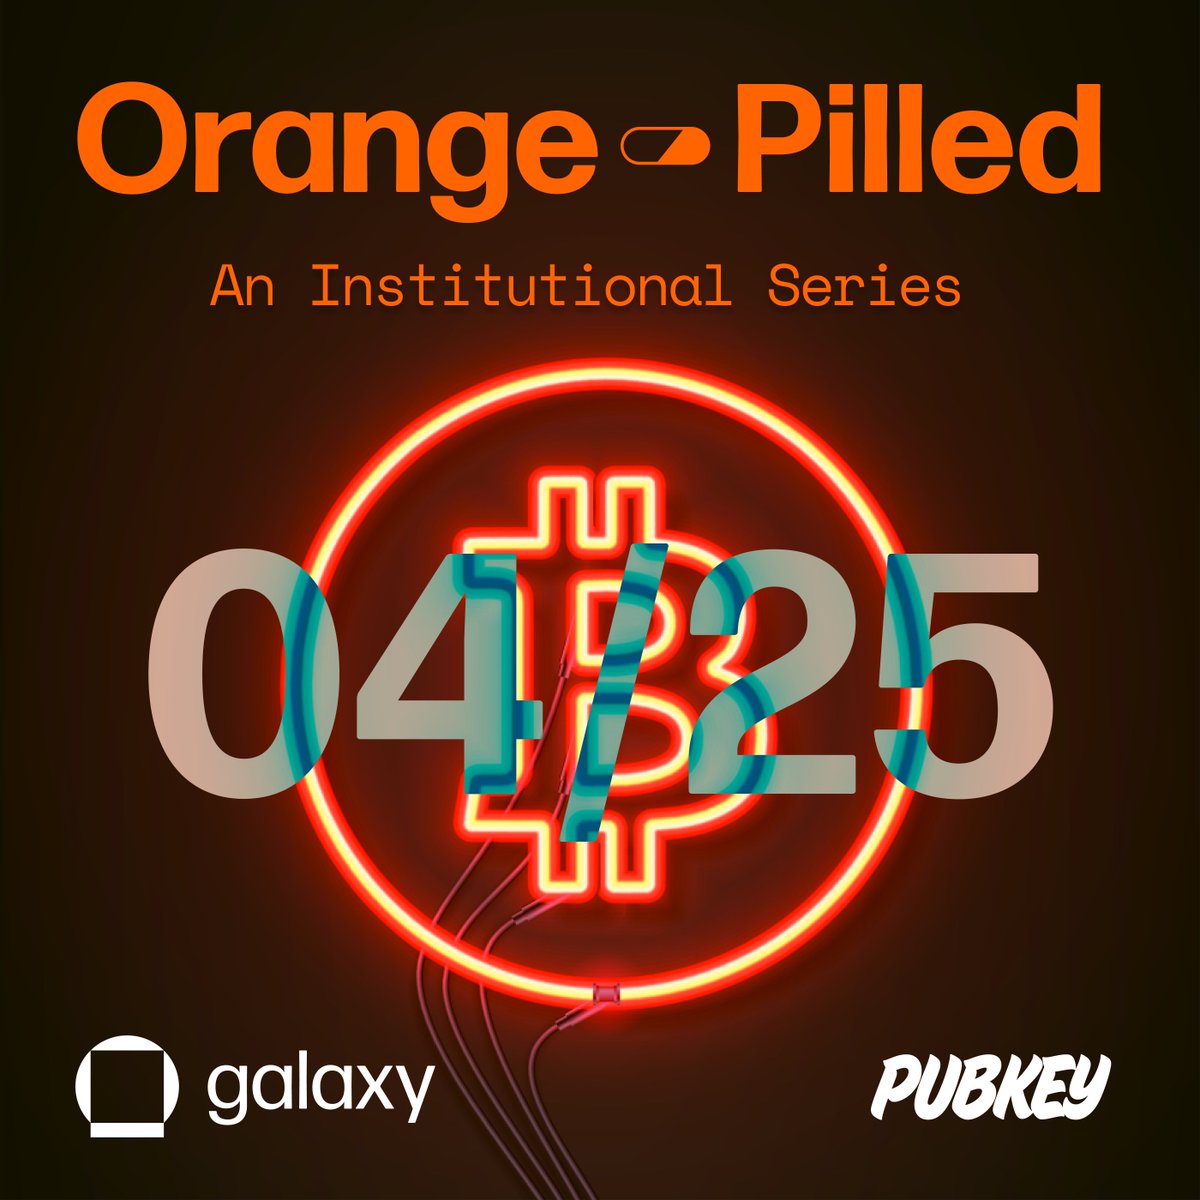 🍊💊 Join us for Edition #3 of Orange-Pilled this Thursday, April 25 at @PubKey_NYC 💊🍊 We'll be having a post-halving discussion around Bitcoin mining economics with Andrew Bond (@RBLTSecurities), @tpacchia (@PubKey_NYC), @austorms (@galaxyhq), and @brian_wright21 (@galaxyhq).